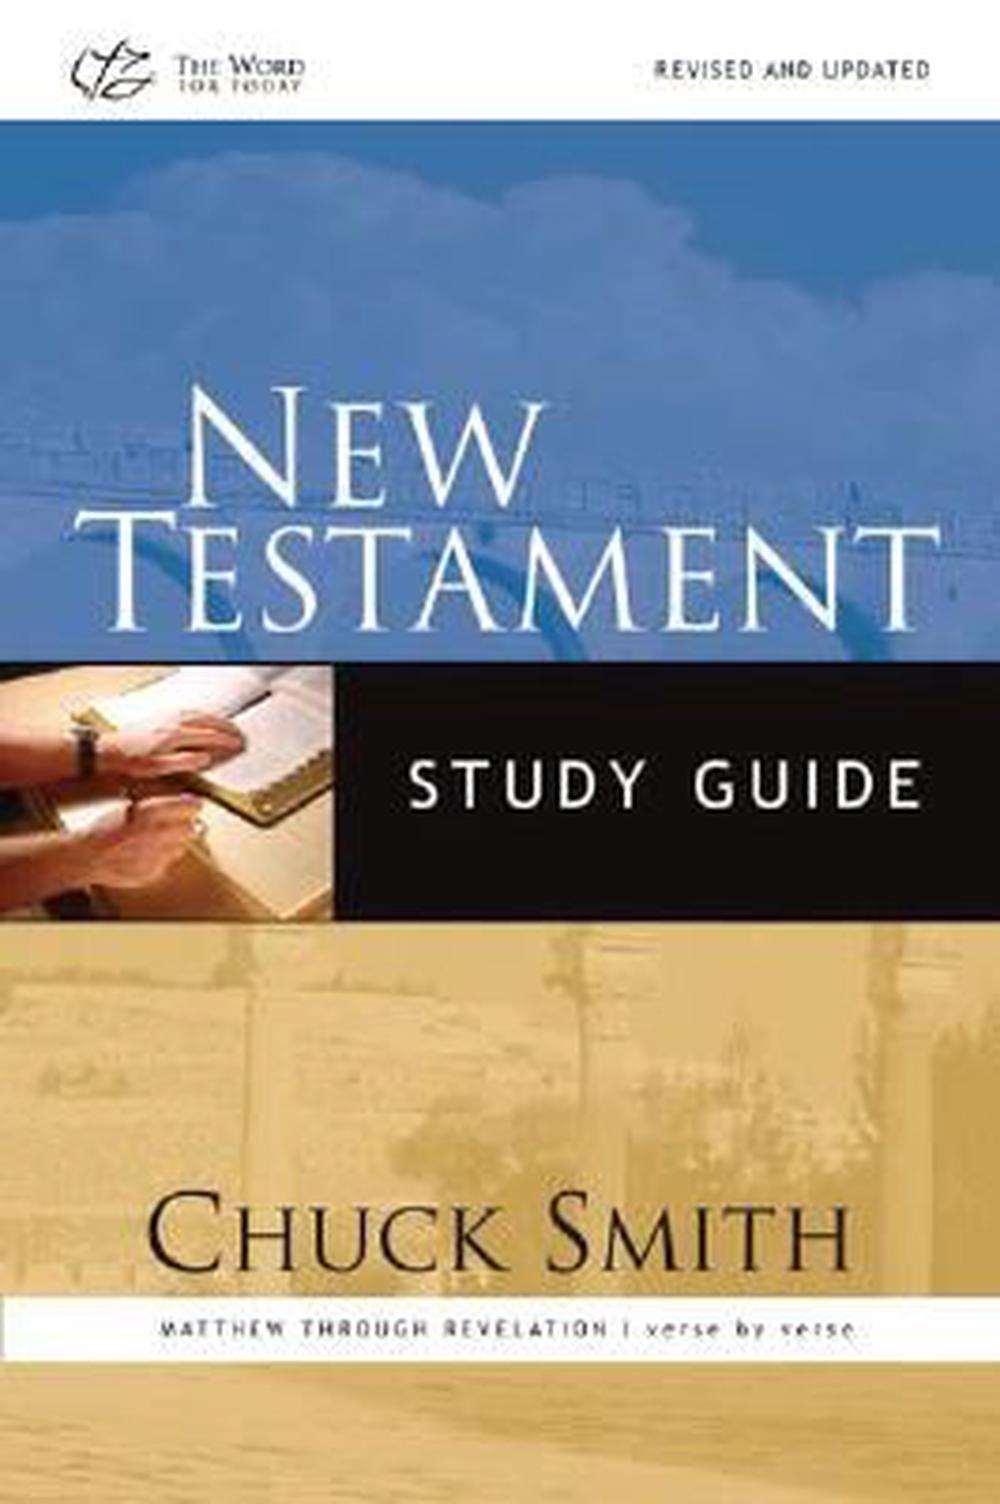 New Testament Study Guide Matthew Through Revelation/Verse by Verse by Chuck Smith, Paperback